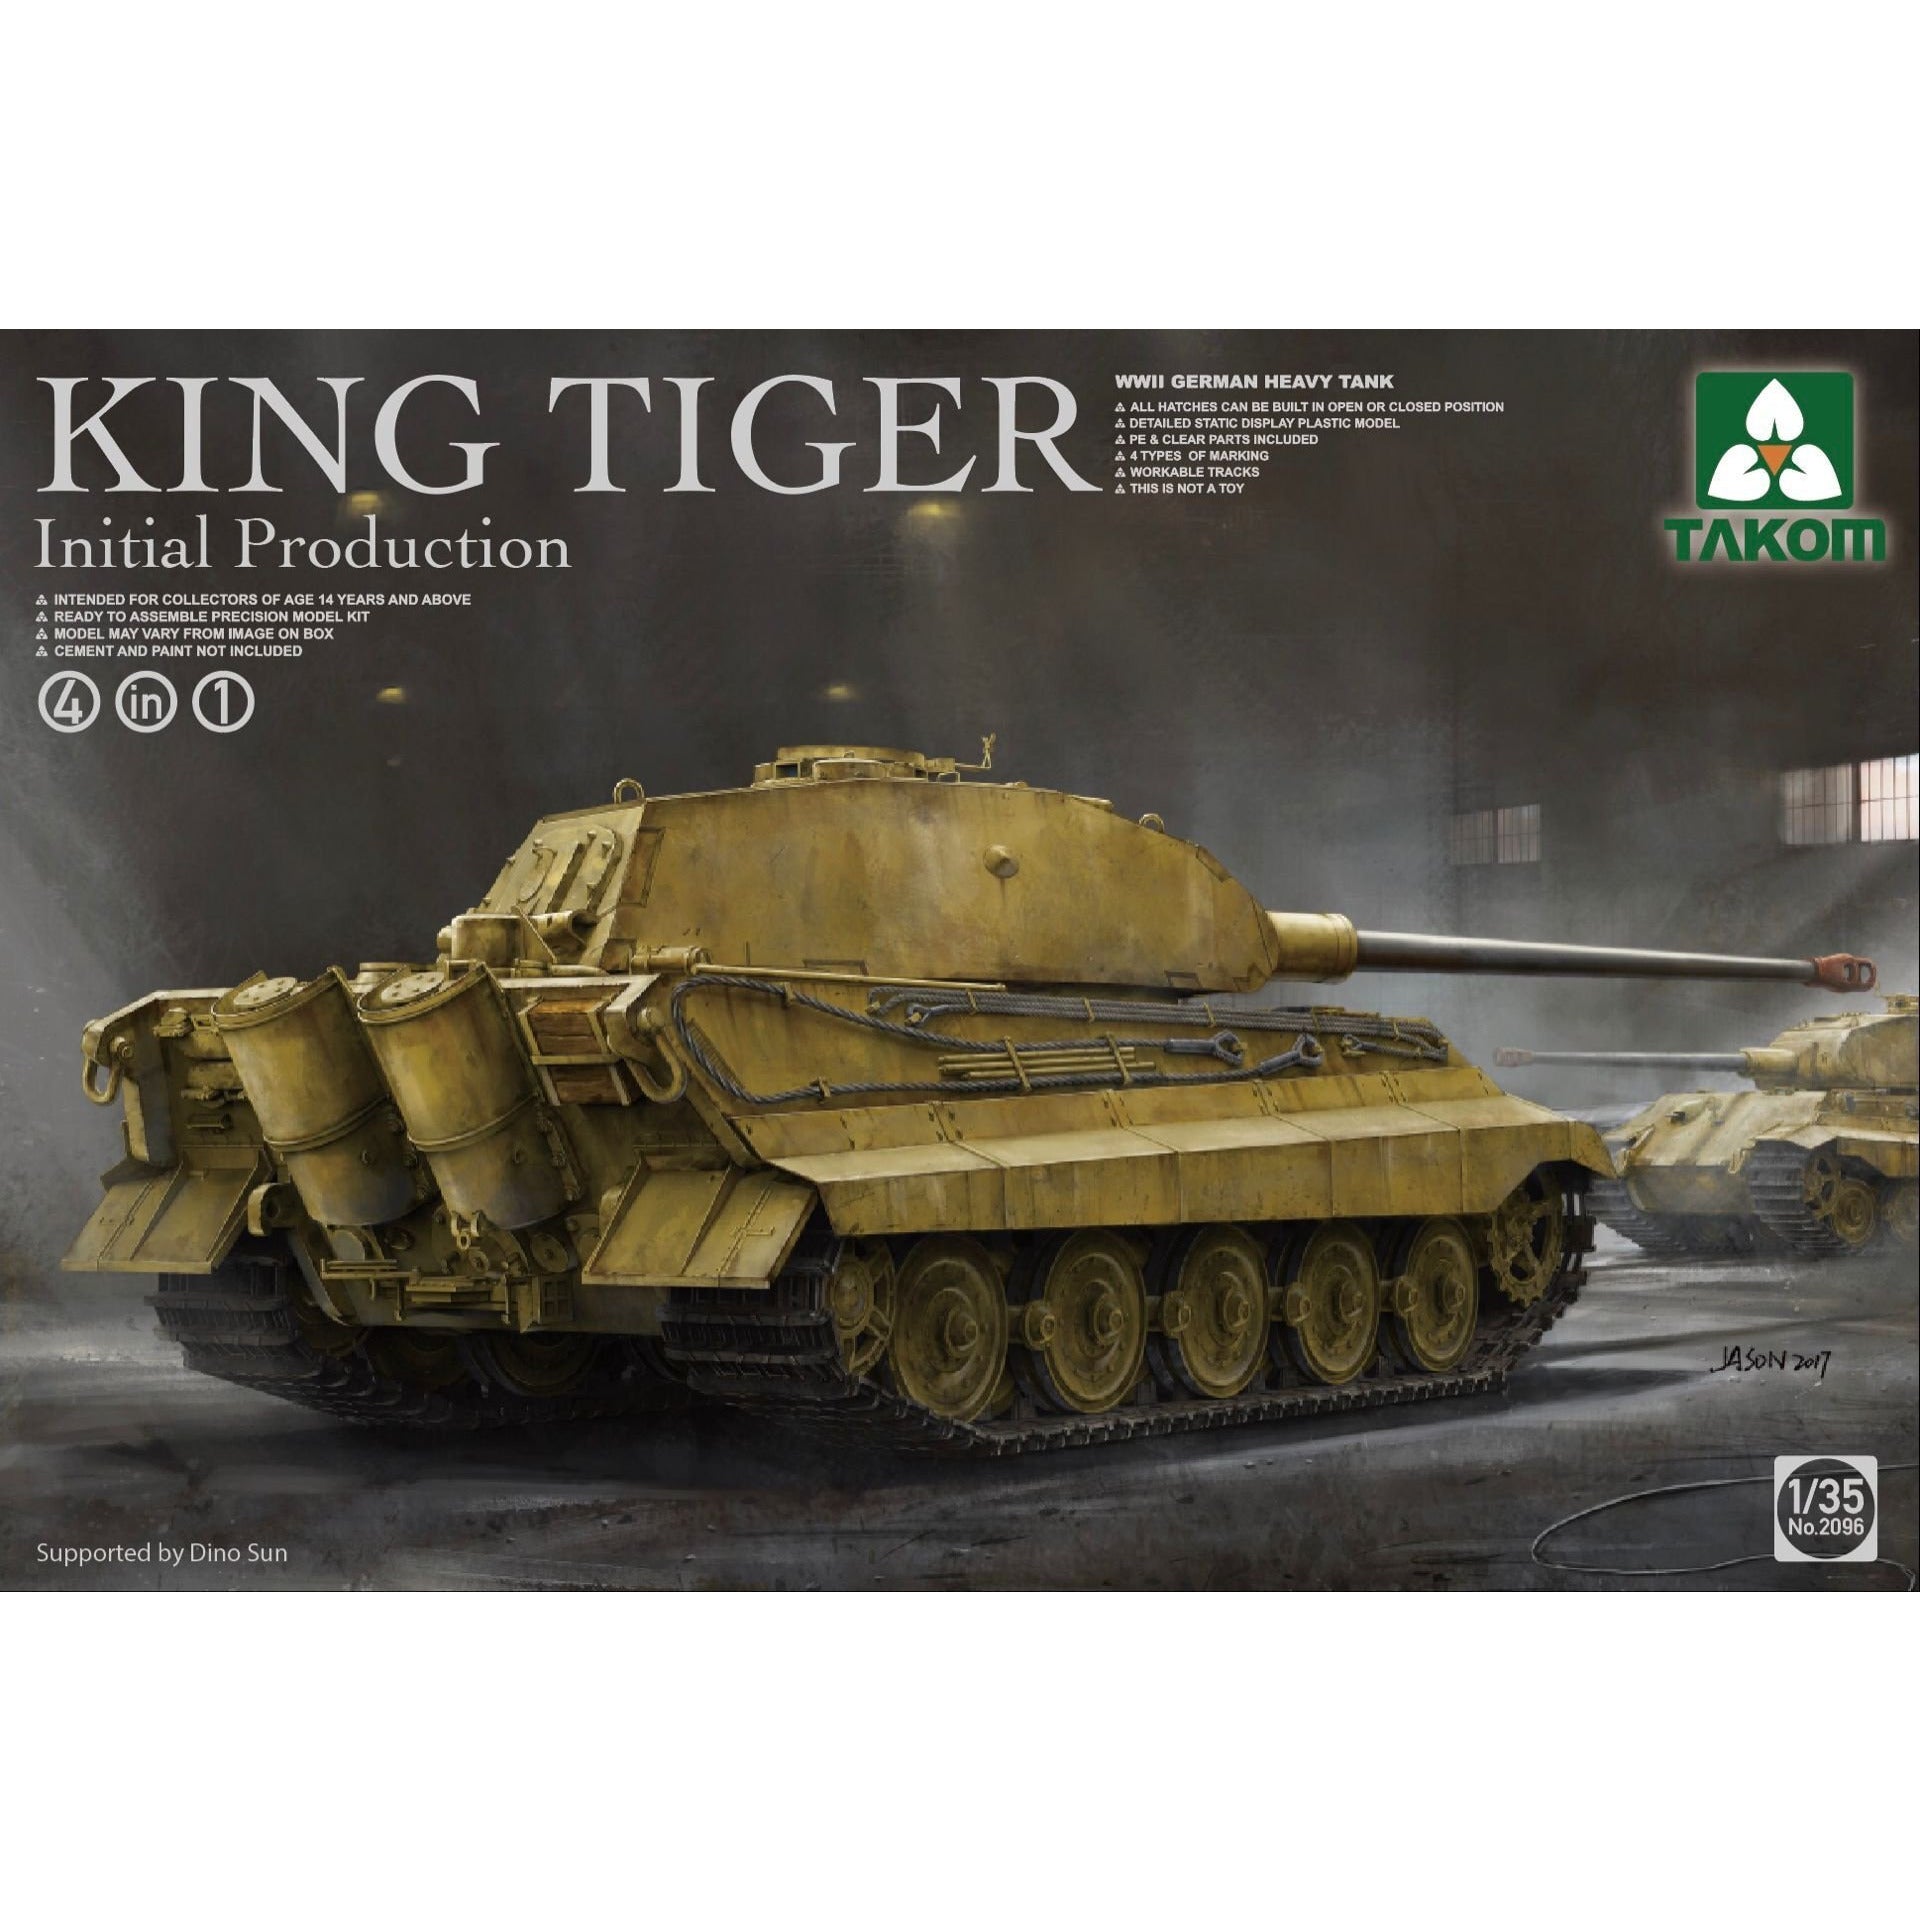 King Tiger Initial Production (4in1) 1/35 by Takom